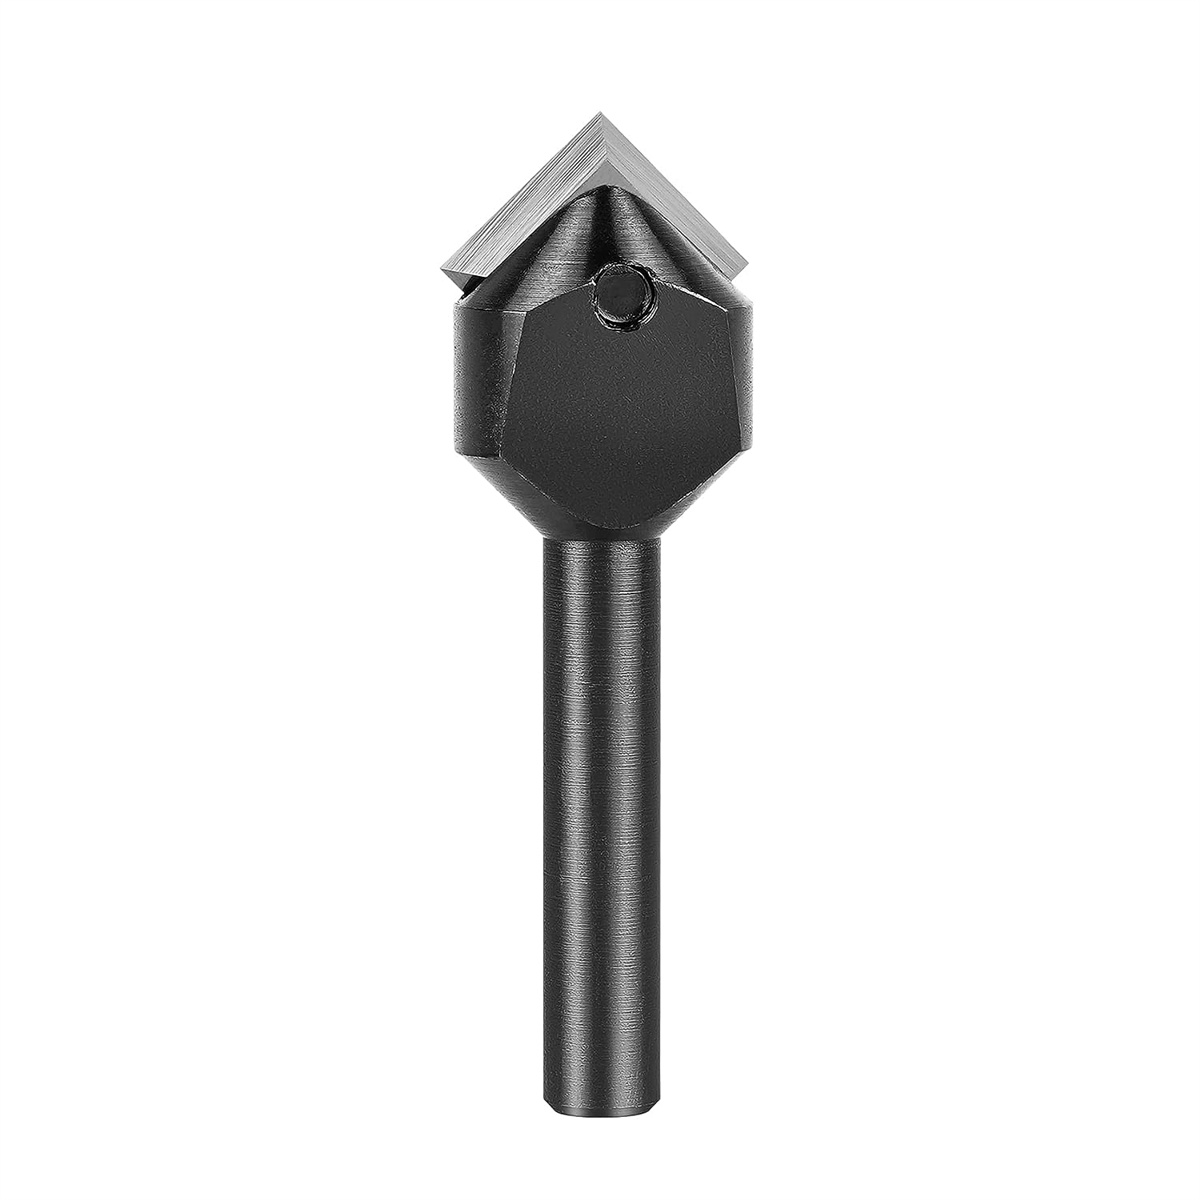 1/4 Inch Shank Industrial Grade V-Shape Carbide Insert 90 Degree Router Bit for CNC Wood Engraving Chamfer Carving